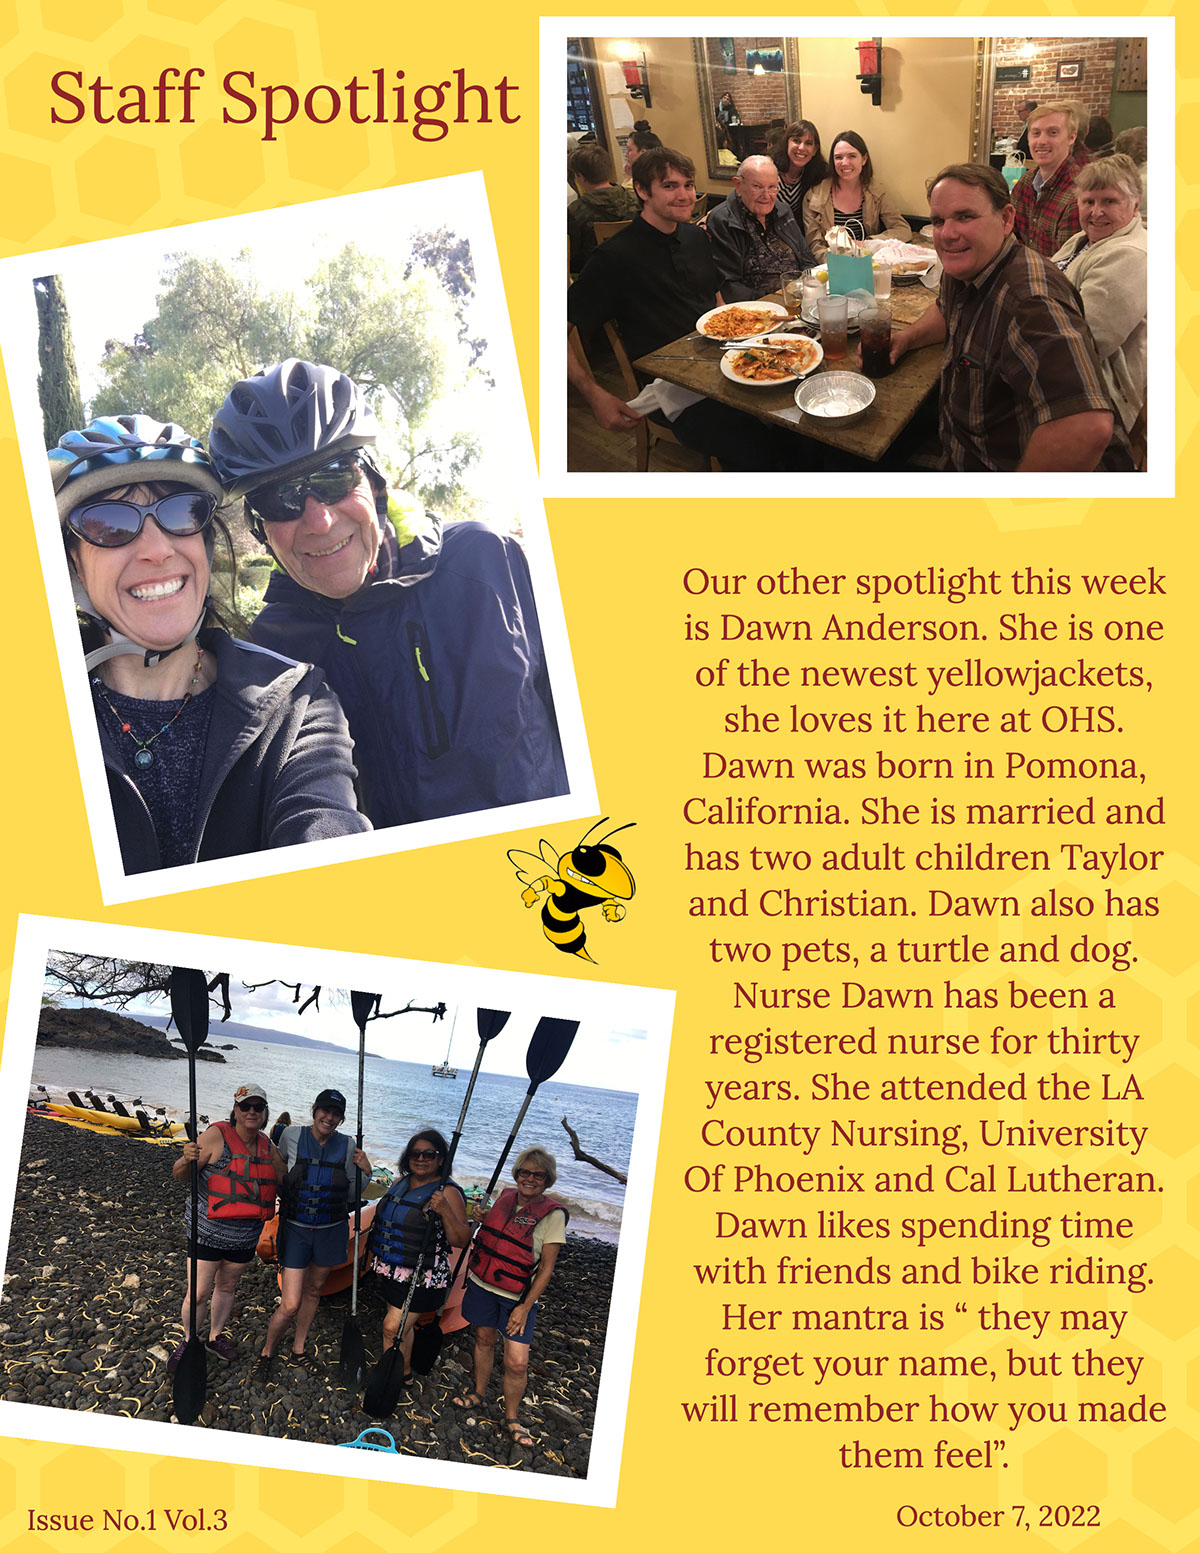 The Hive Newsletter The Hive Newsletter The Heart of O-Town Hard Work & Teamwork Golden Ticket Winners The winners for the past two weeks are: Michelle Muary and Ixchett Saldivar If you have these students in class, congratulate them for a job well done! Stephanie Almstrom’s students are showing H.E.A.R.T by working hard and working together at Celebrate for Life. October 7, 2022 Issue No.1 Vol.3